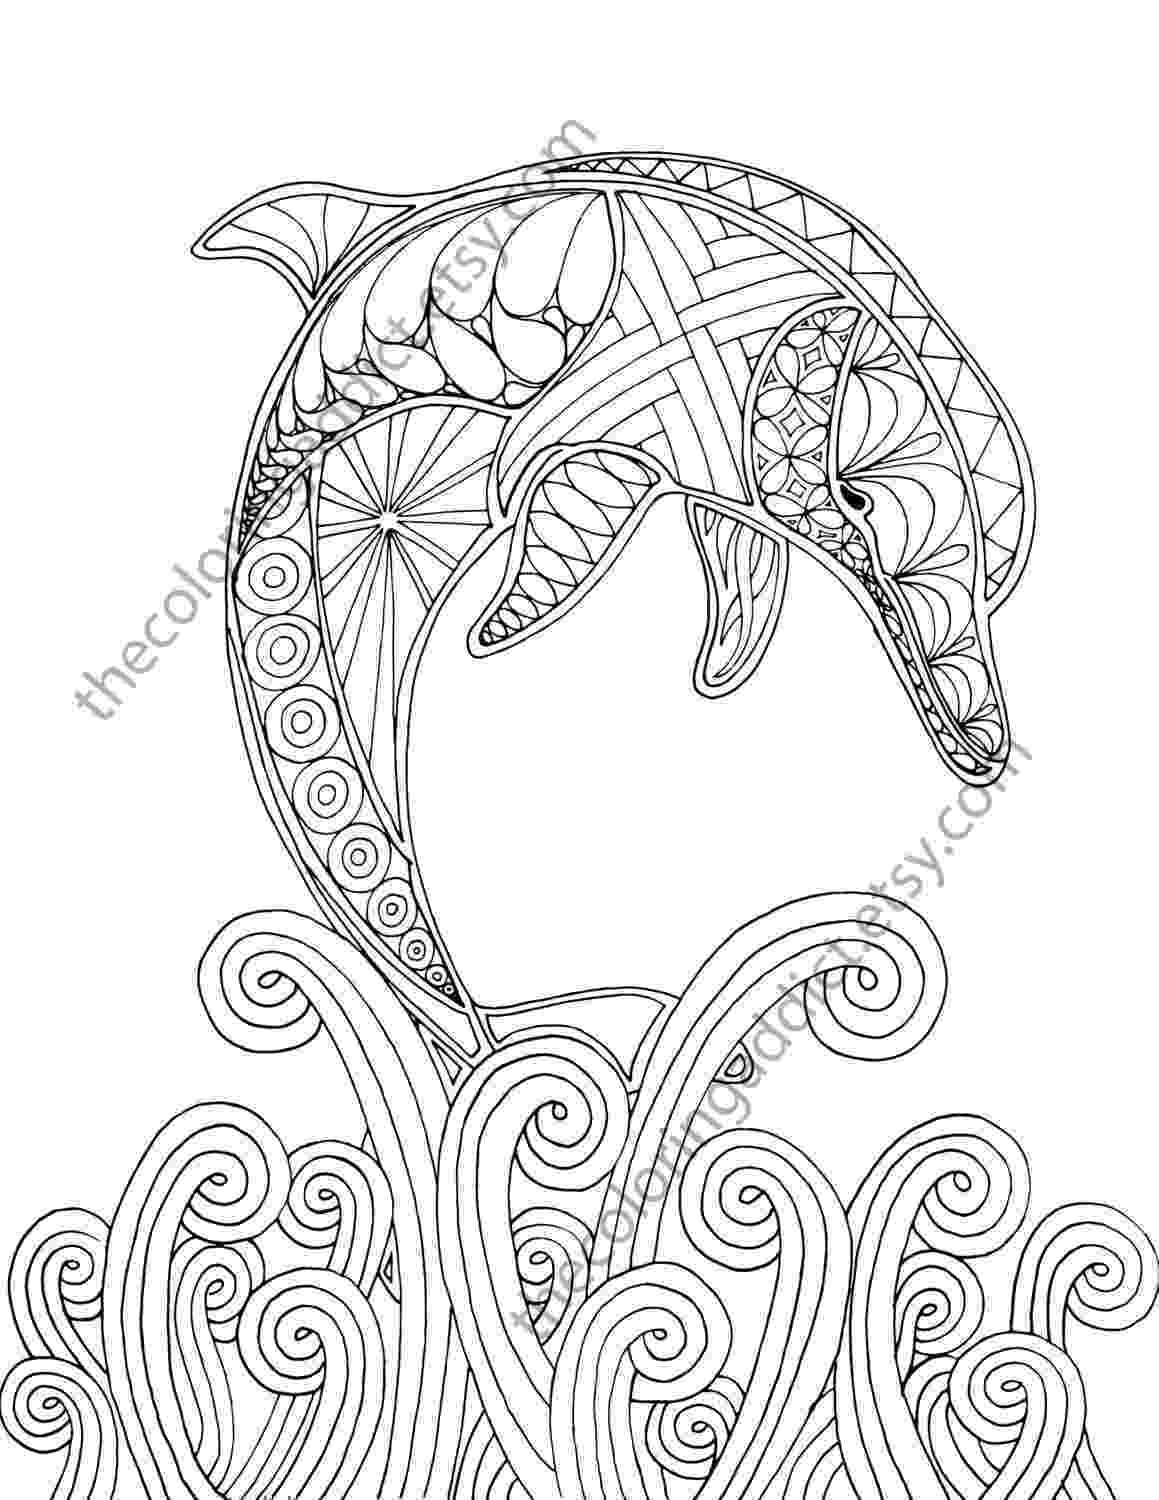 free printable dolphin coloring pages dolphin coloring page adult coloring sheet by free dolphin coloring pages printable 